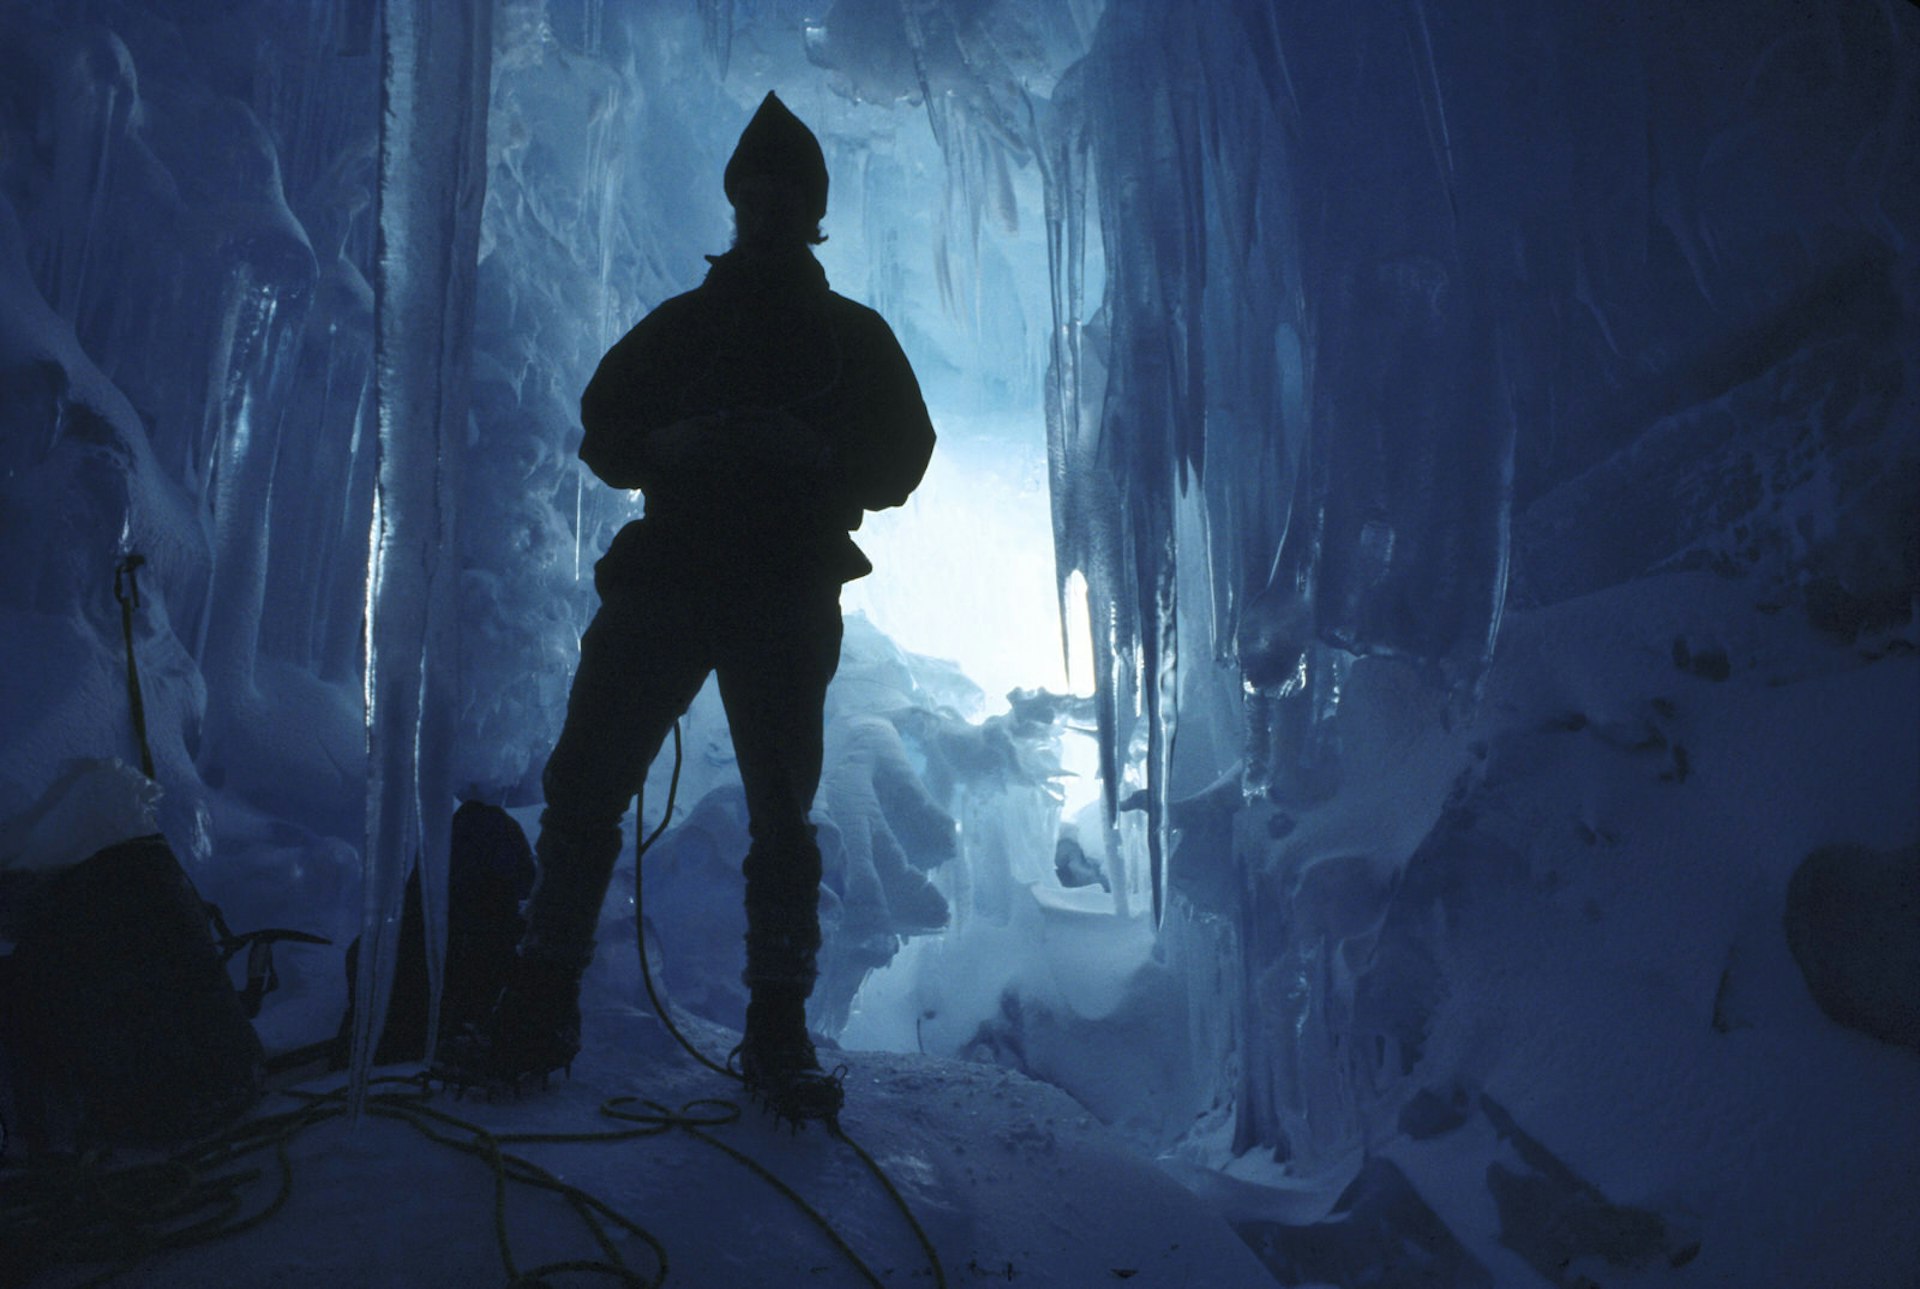 Silhouette of man in an ice cave